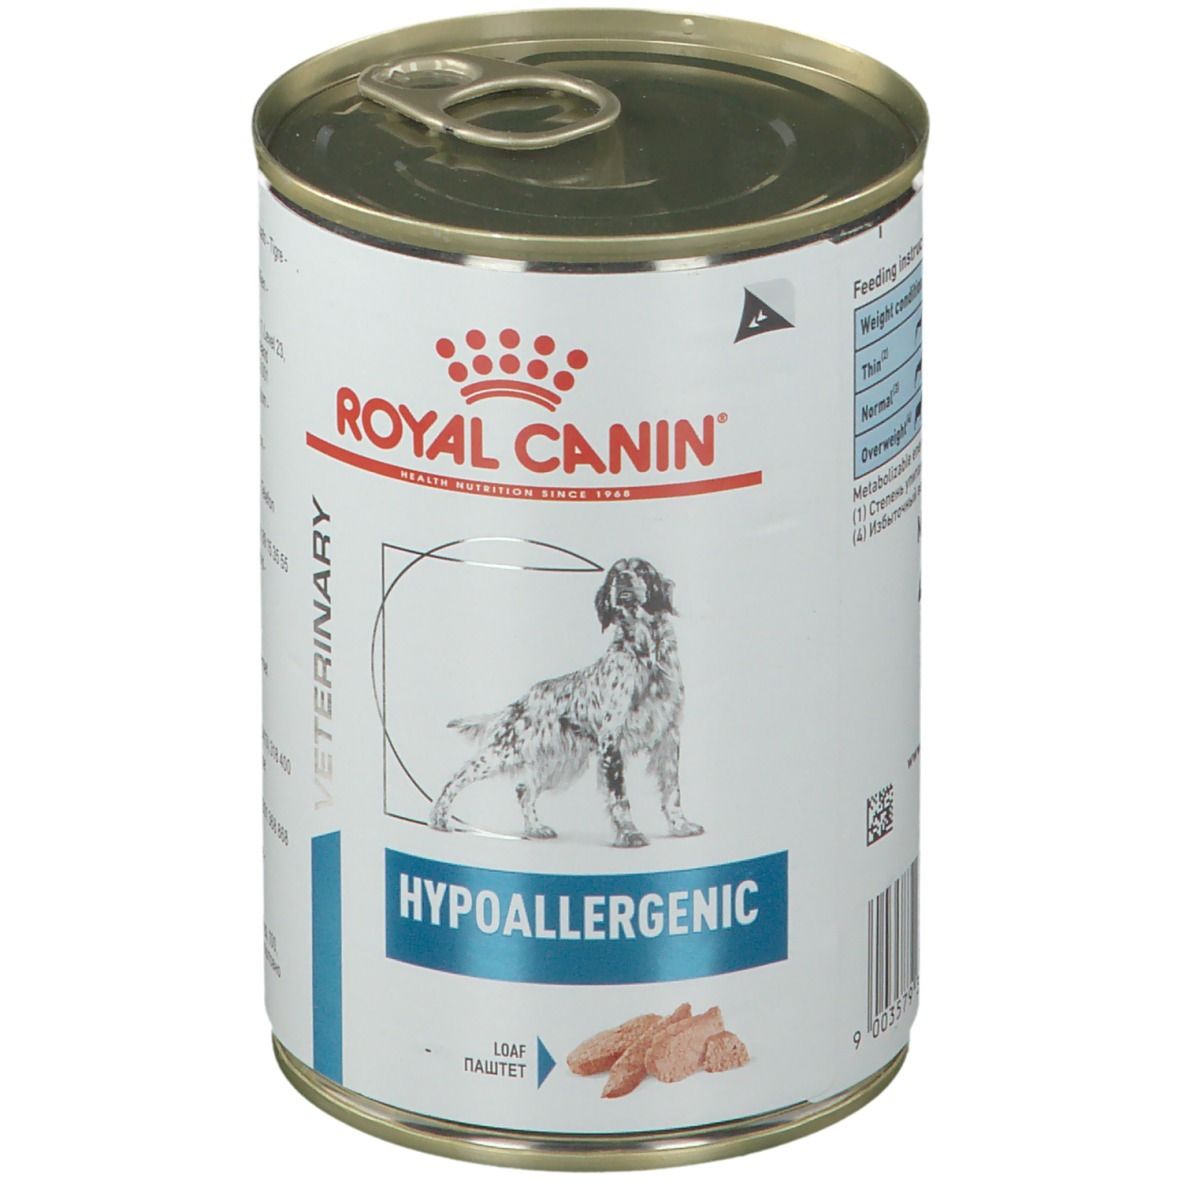 ROYAL CANIN Hypoallergenic Nassfutter